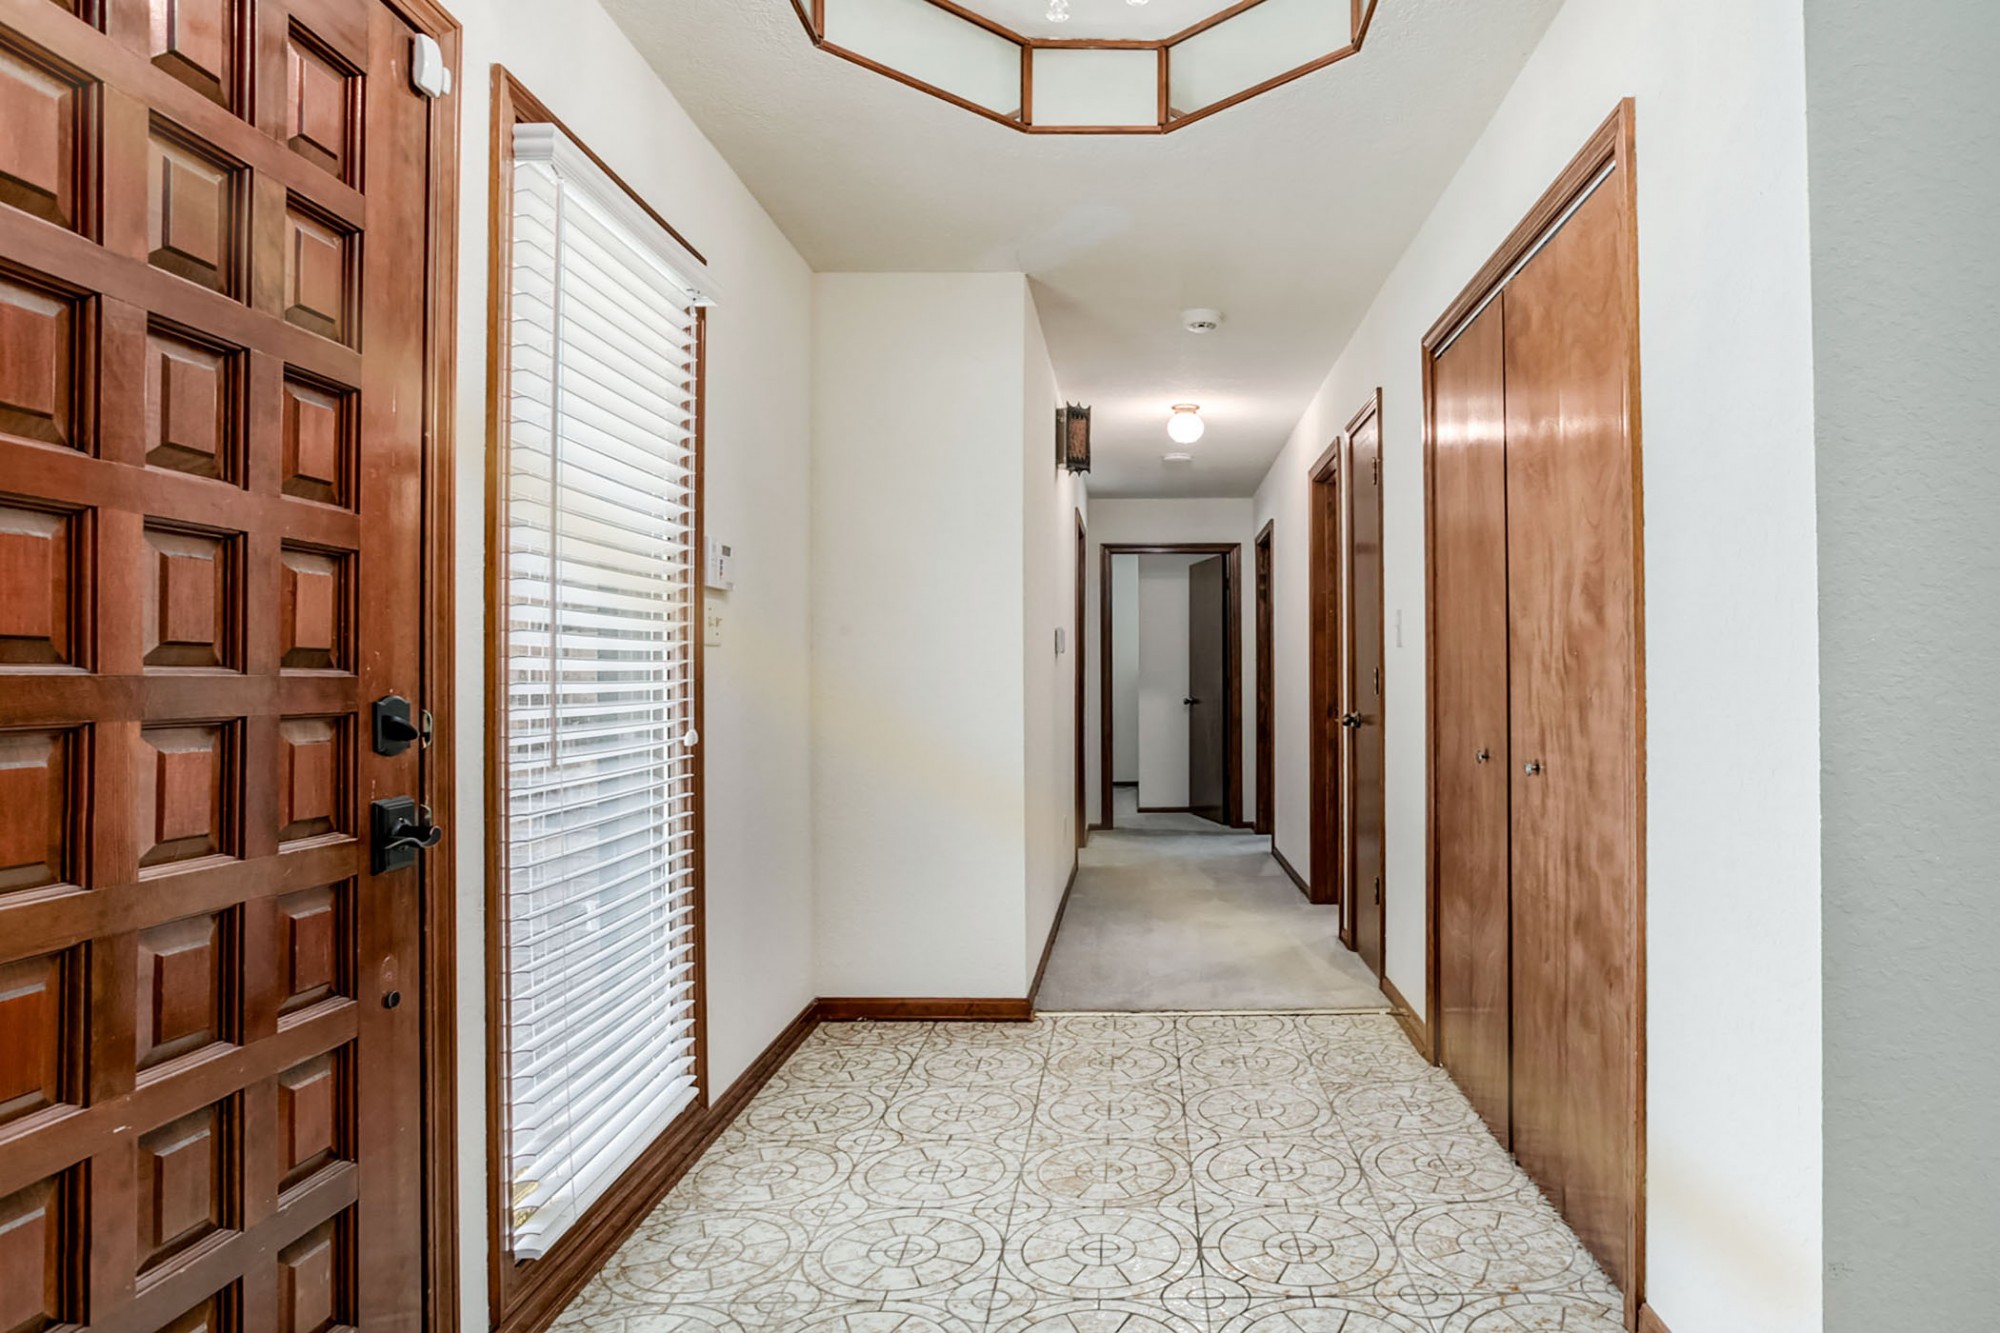 ENTRY WITH CERAMIC TILE FLOORING